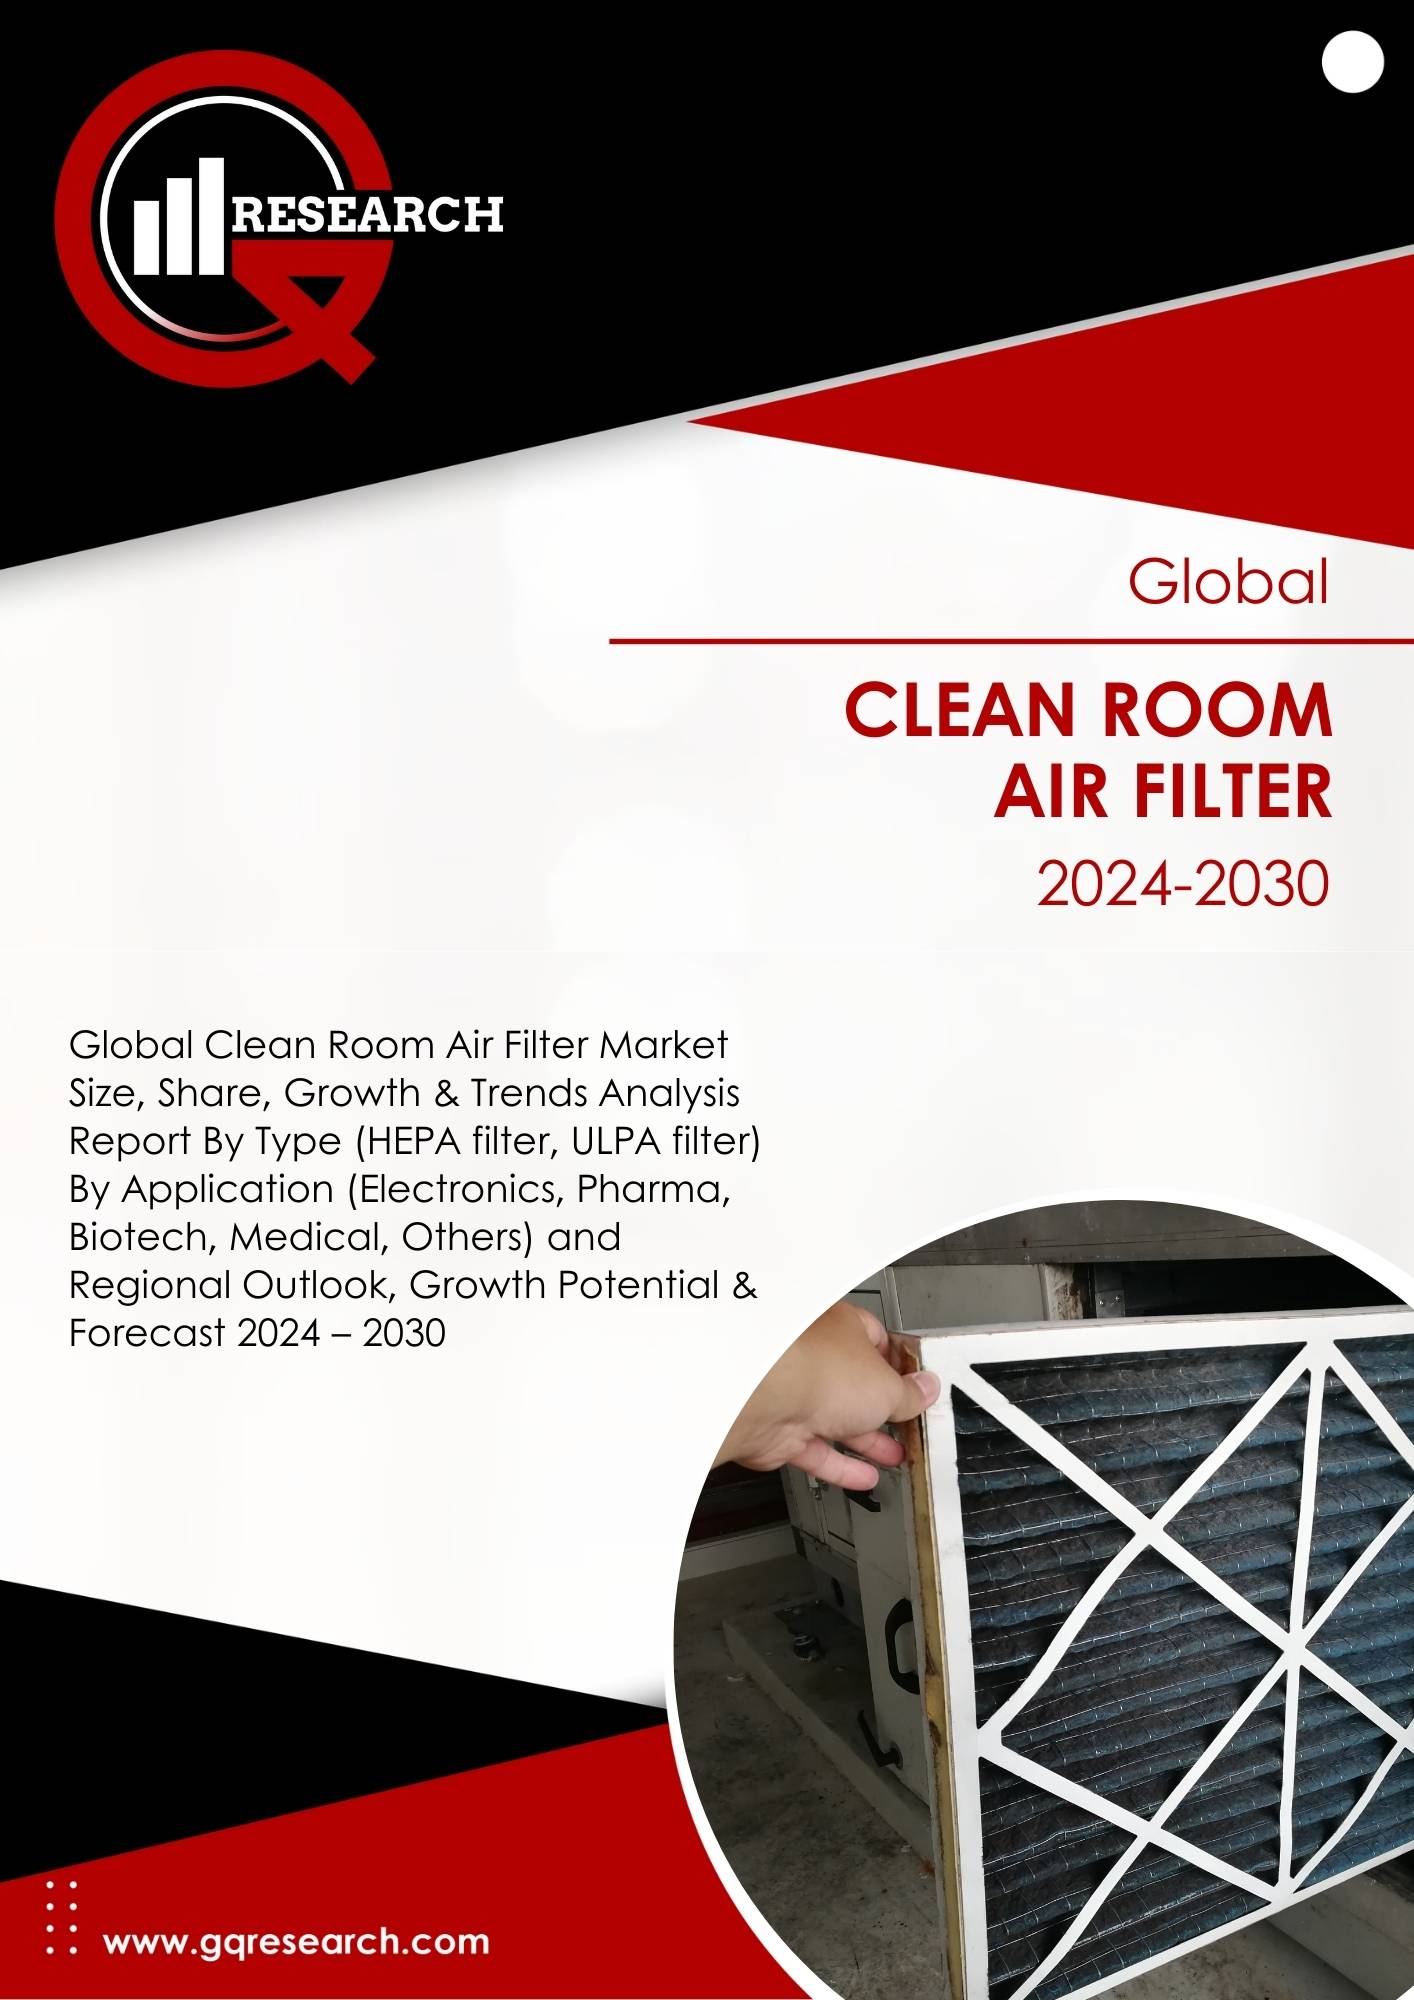 Clean Room Air Filter Market Size, Share, Growth and Forecast to 2030 | GQ Research